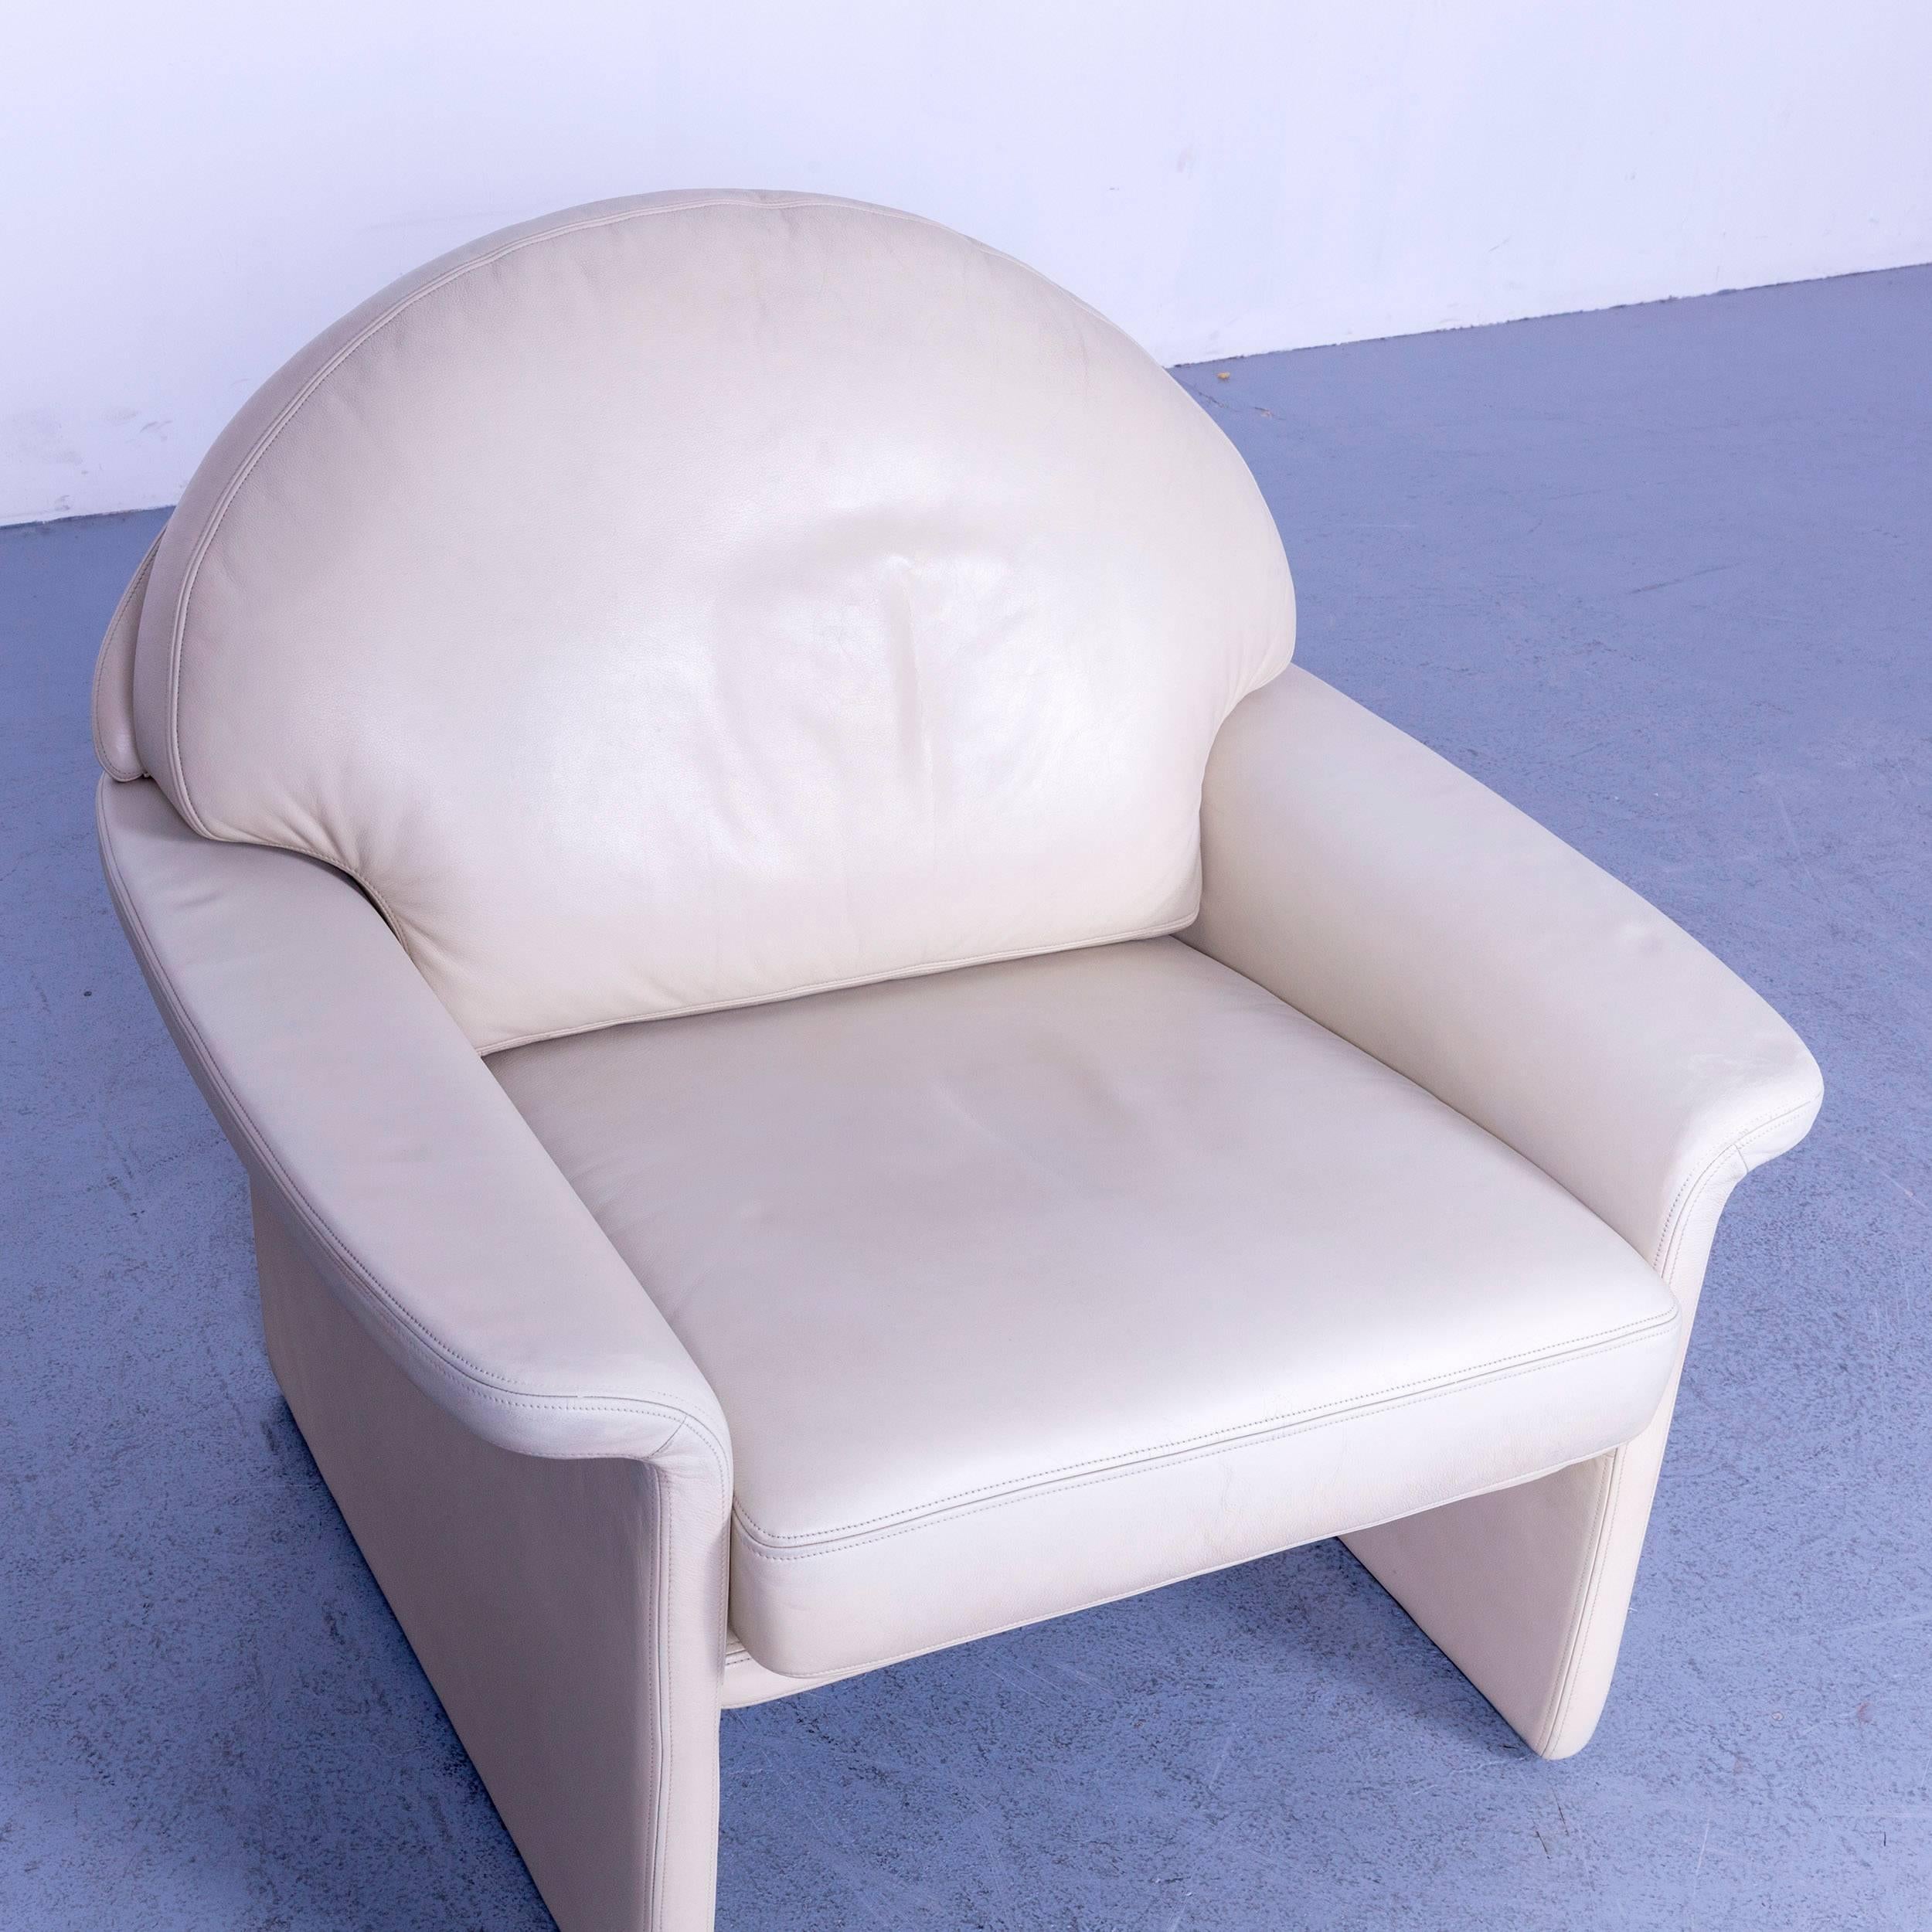 Contemporary De Sede Leather Armchair Off-White One-Seat Chair